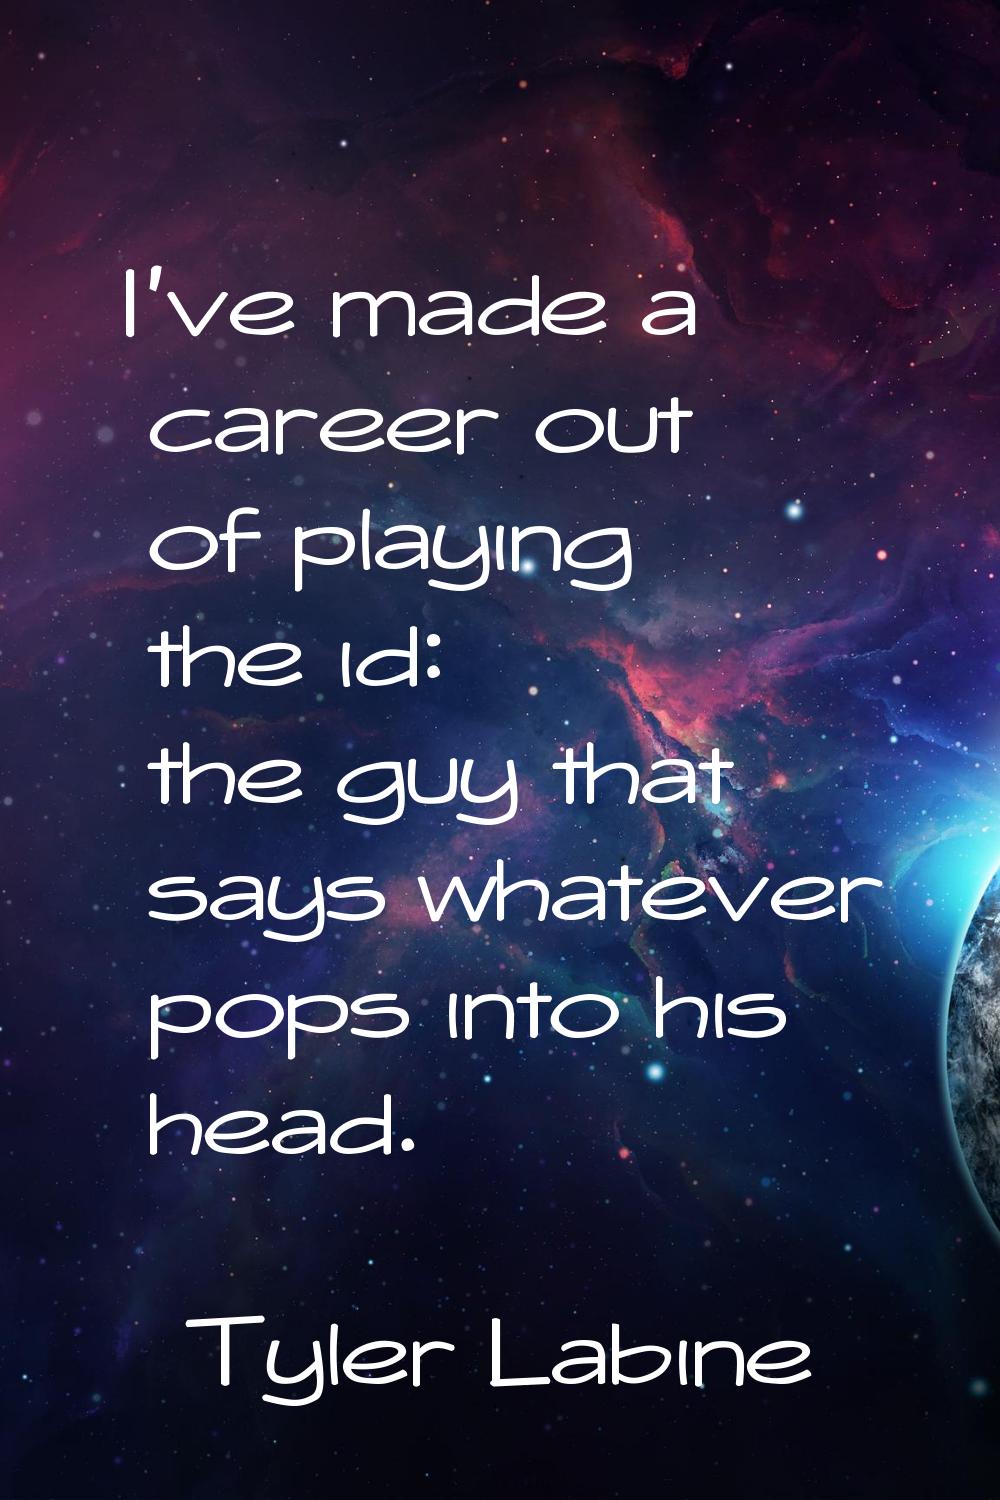 I've made a career out of playing the id: the guy that says whatever pops into his head.